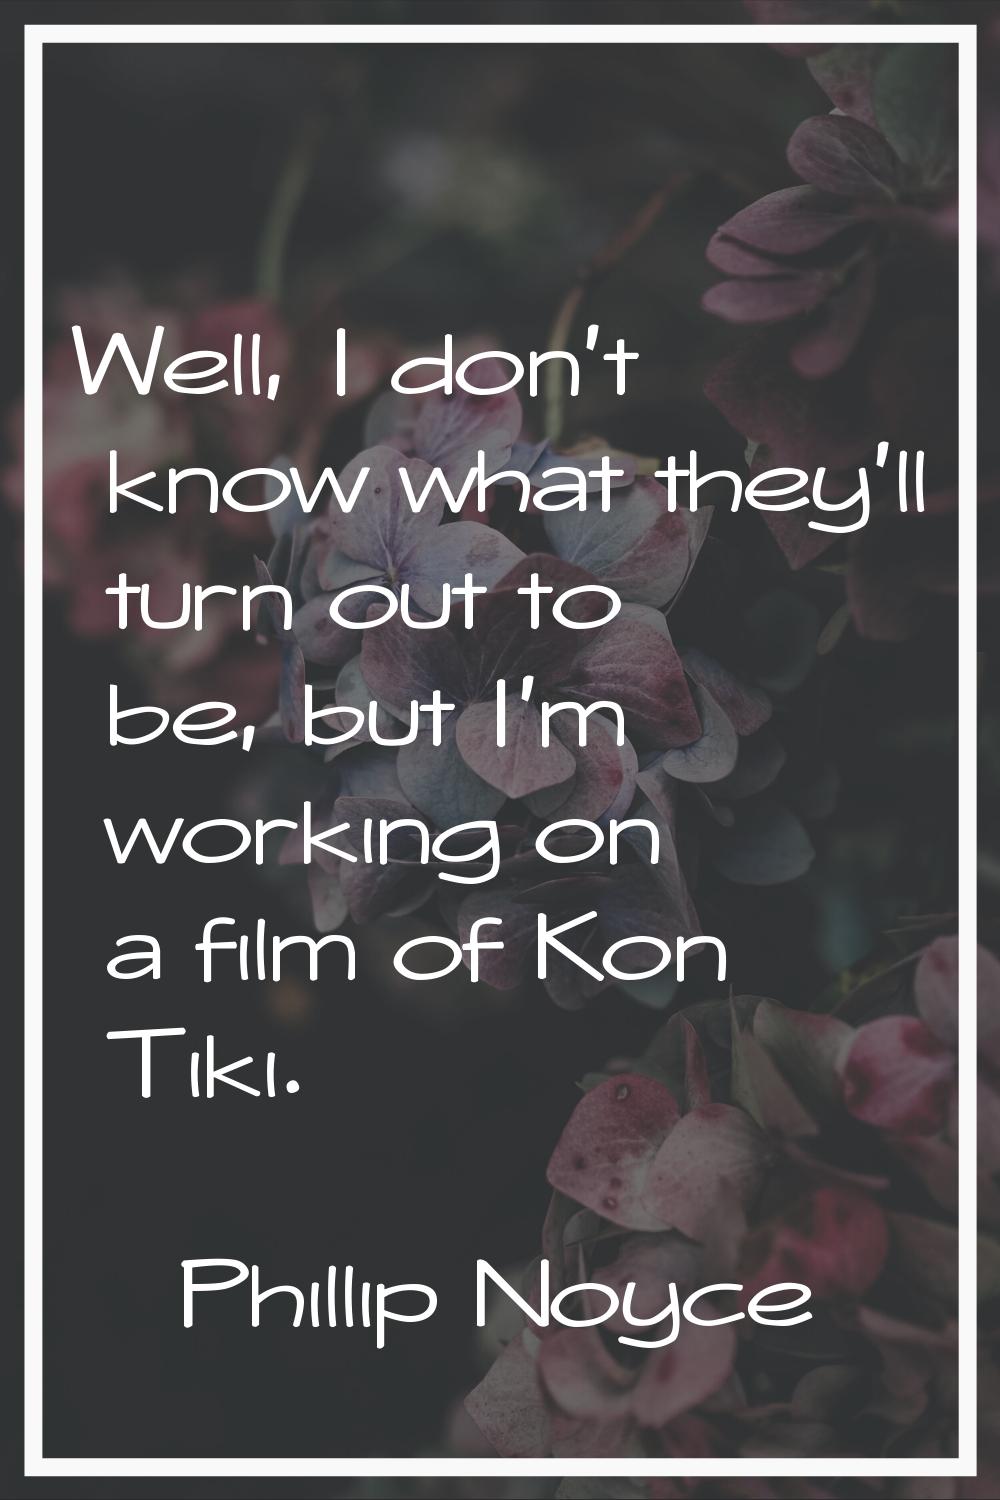 Well, I don't know what they'll turn out to be, but I'm working on a film of Kon Tiki.